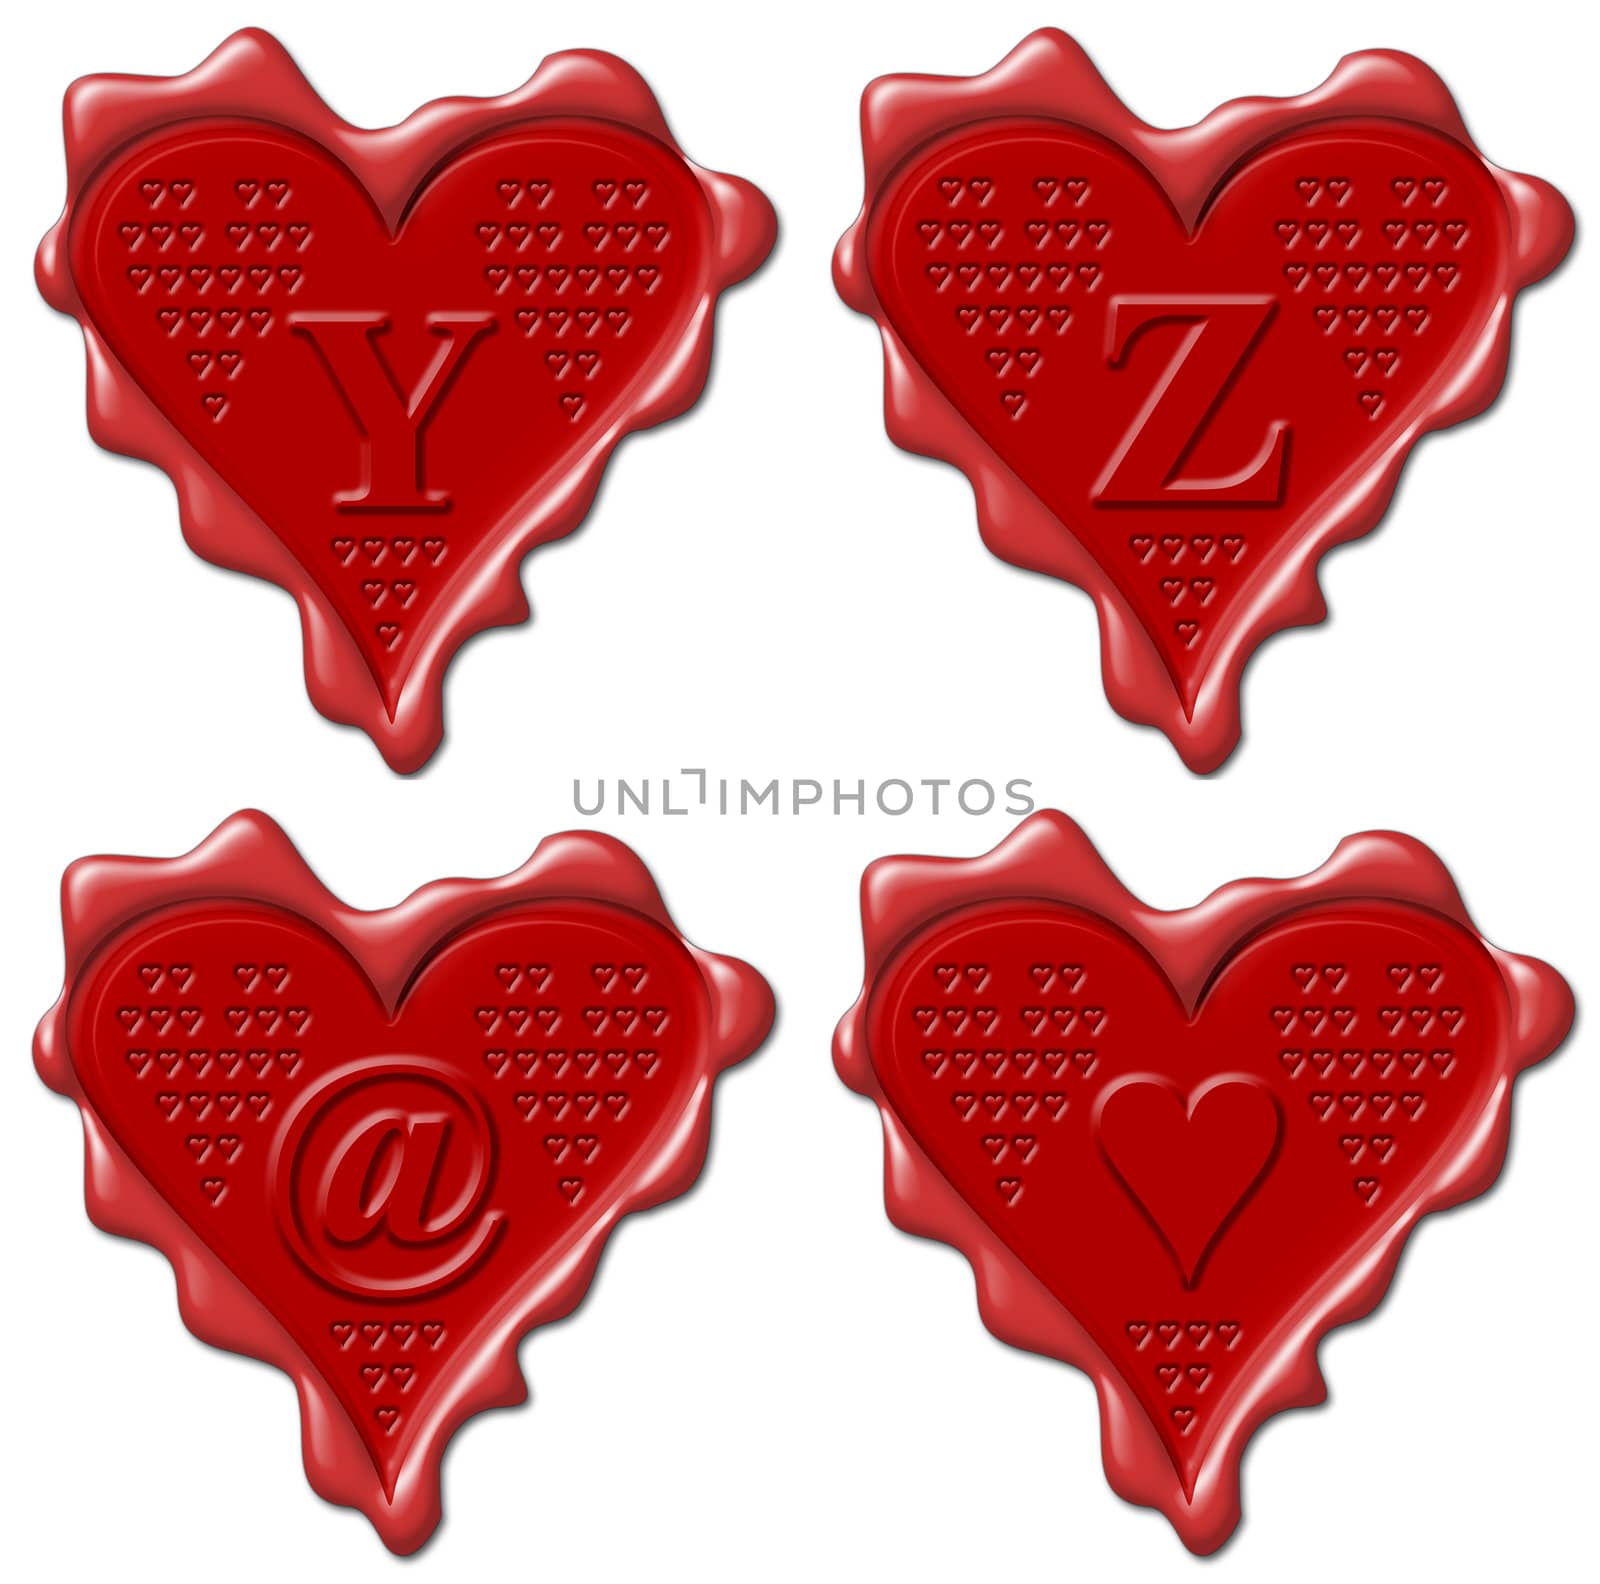 Y, Z, heart - red wax seal collection by mozzyb